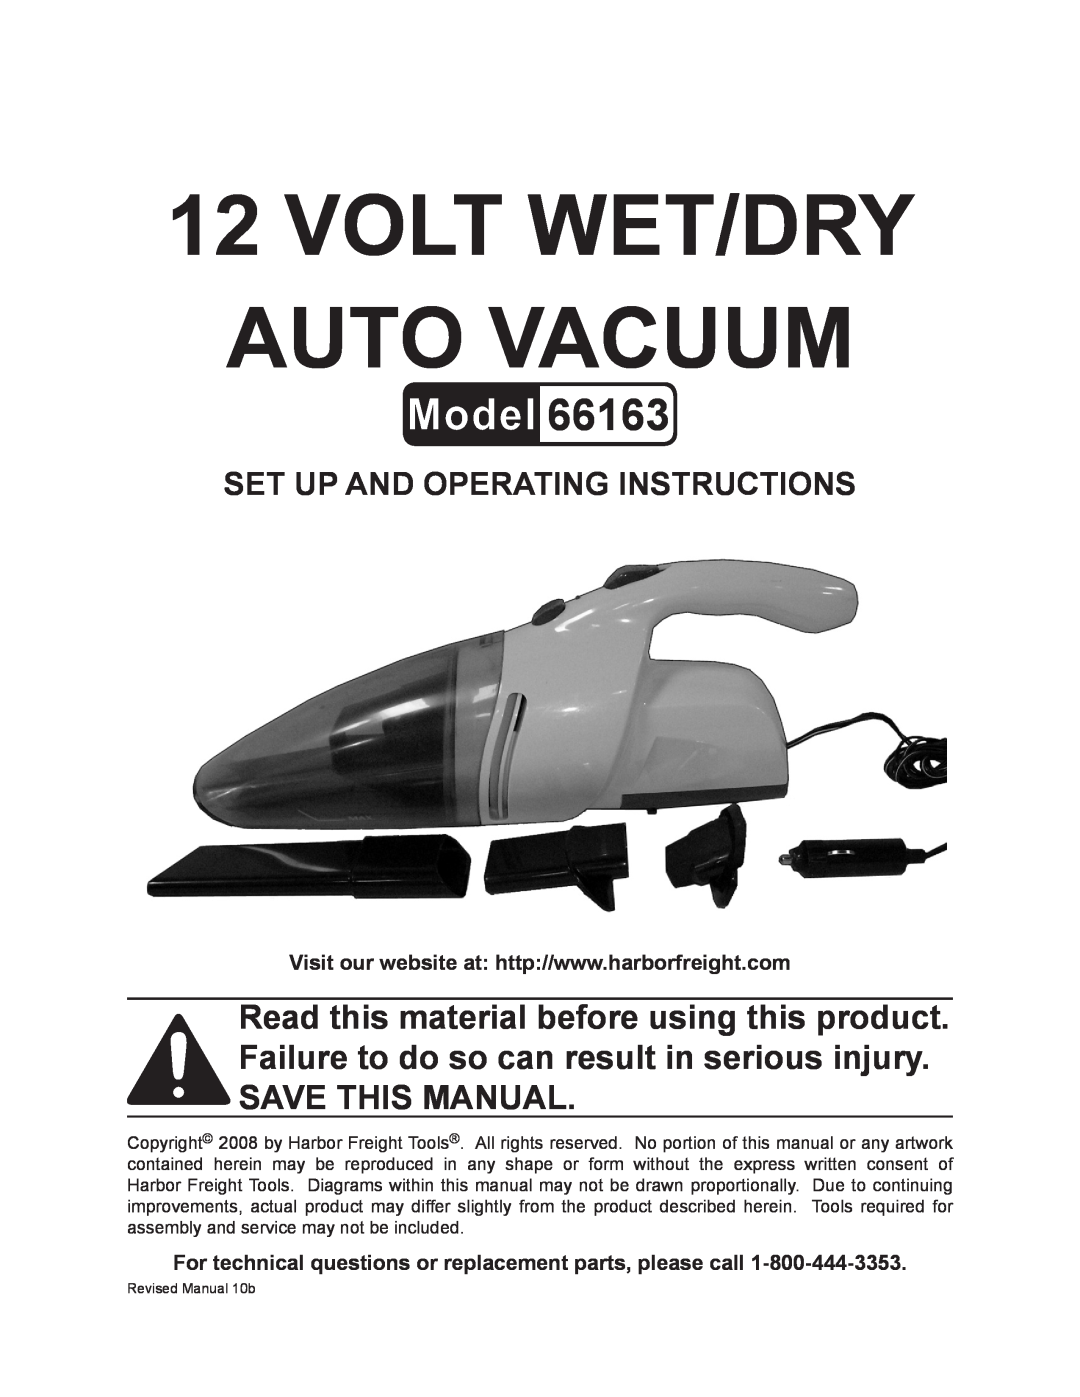 Harbor Freight Tools 66163 operating instructions Volt Wet/Dry Auto Vacuum, Set up and Operating Instructions 